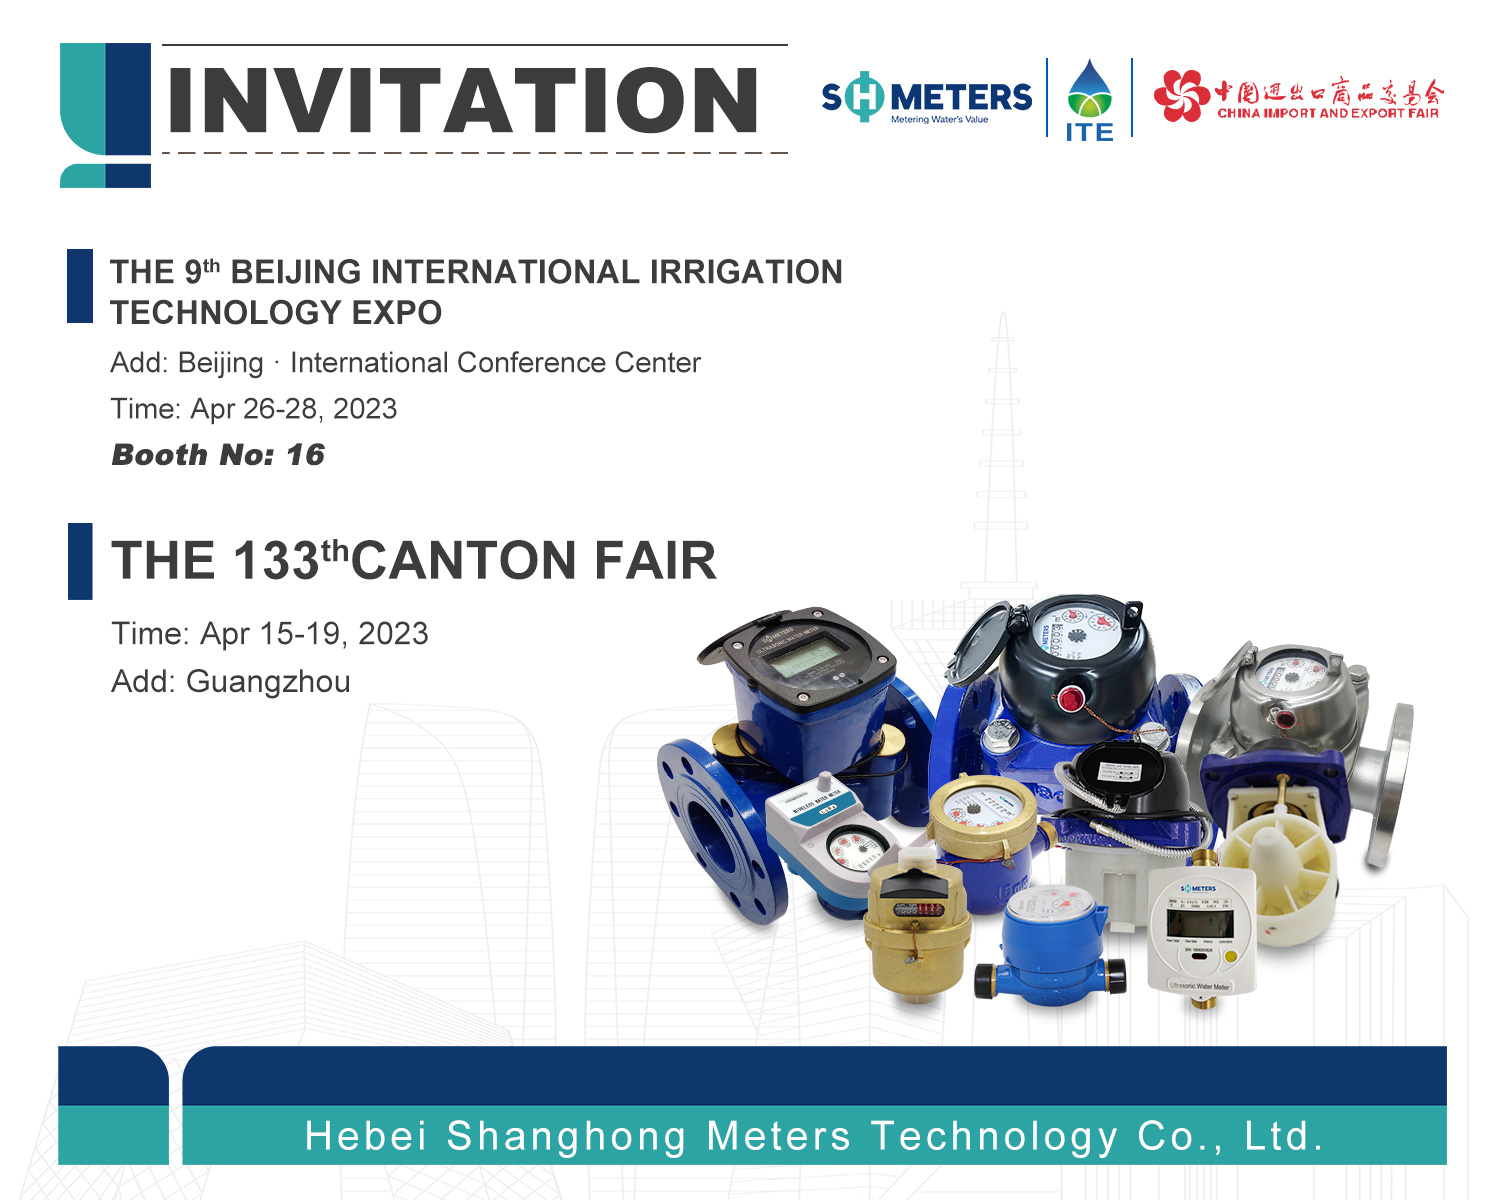 Invitation from S.H.Meters